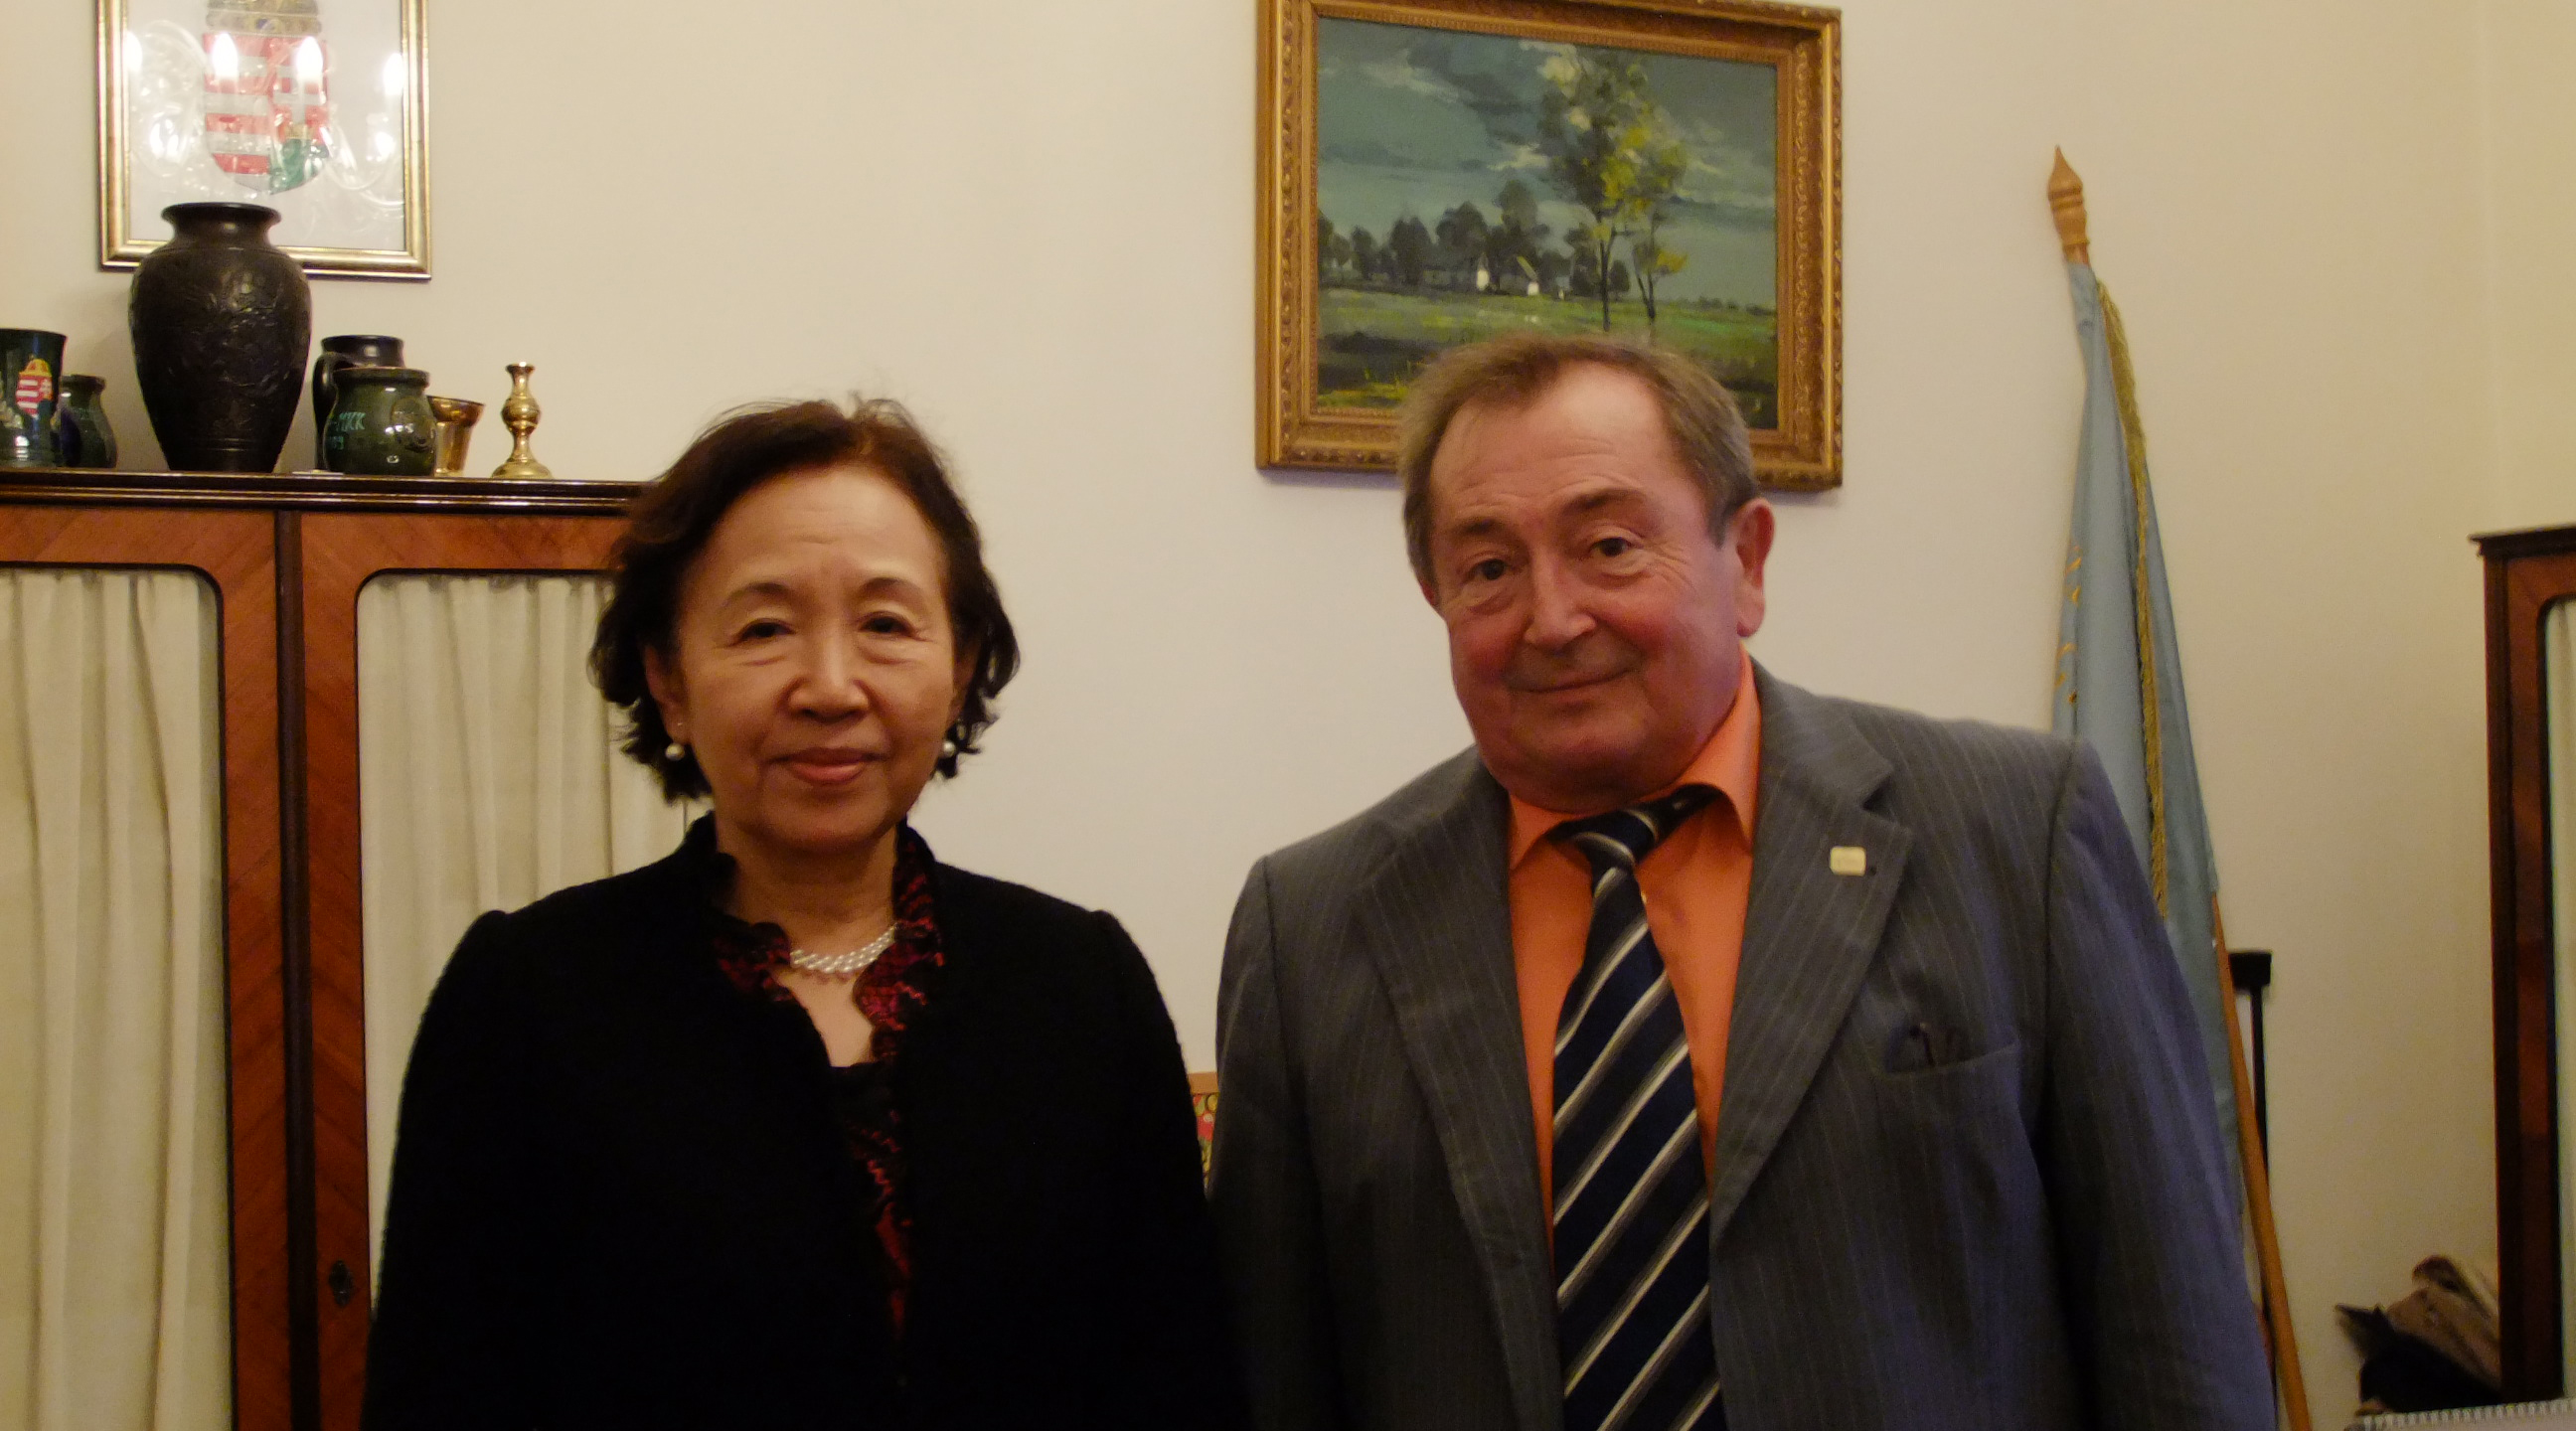 Chancellor MIZUTA with the Dean of the Faculty of Economics and Social Sciences